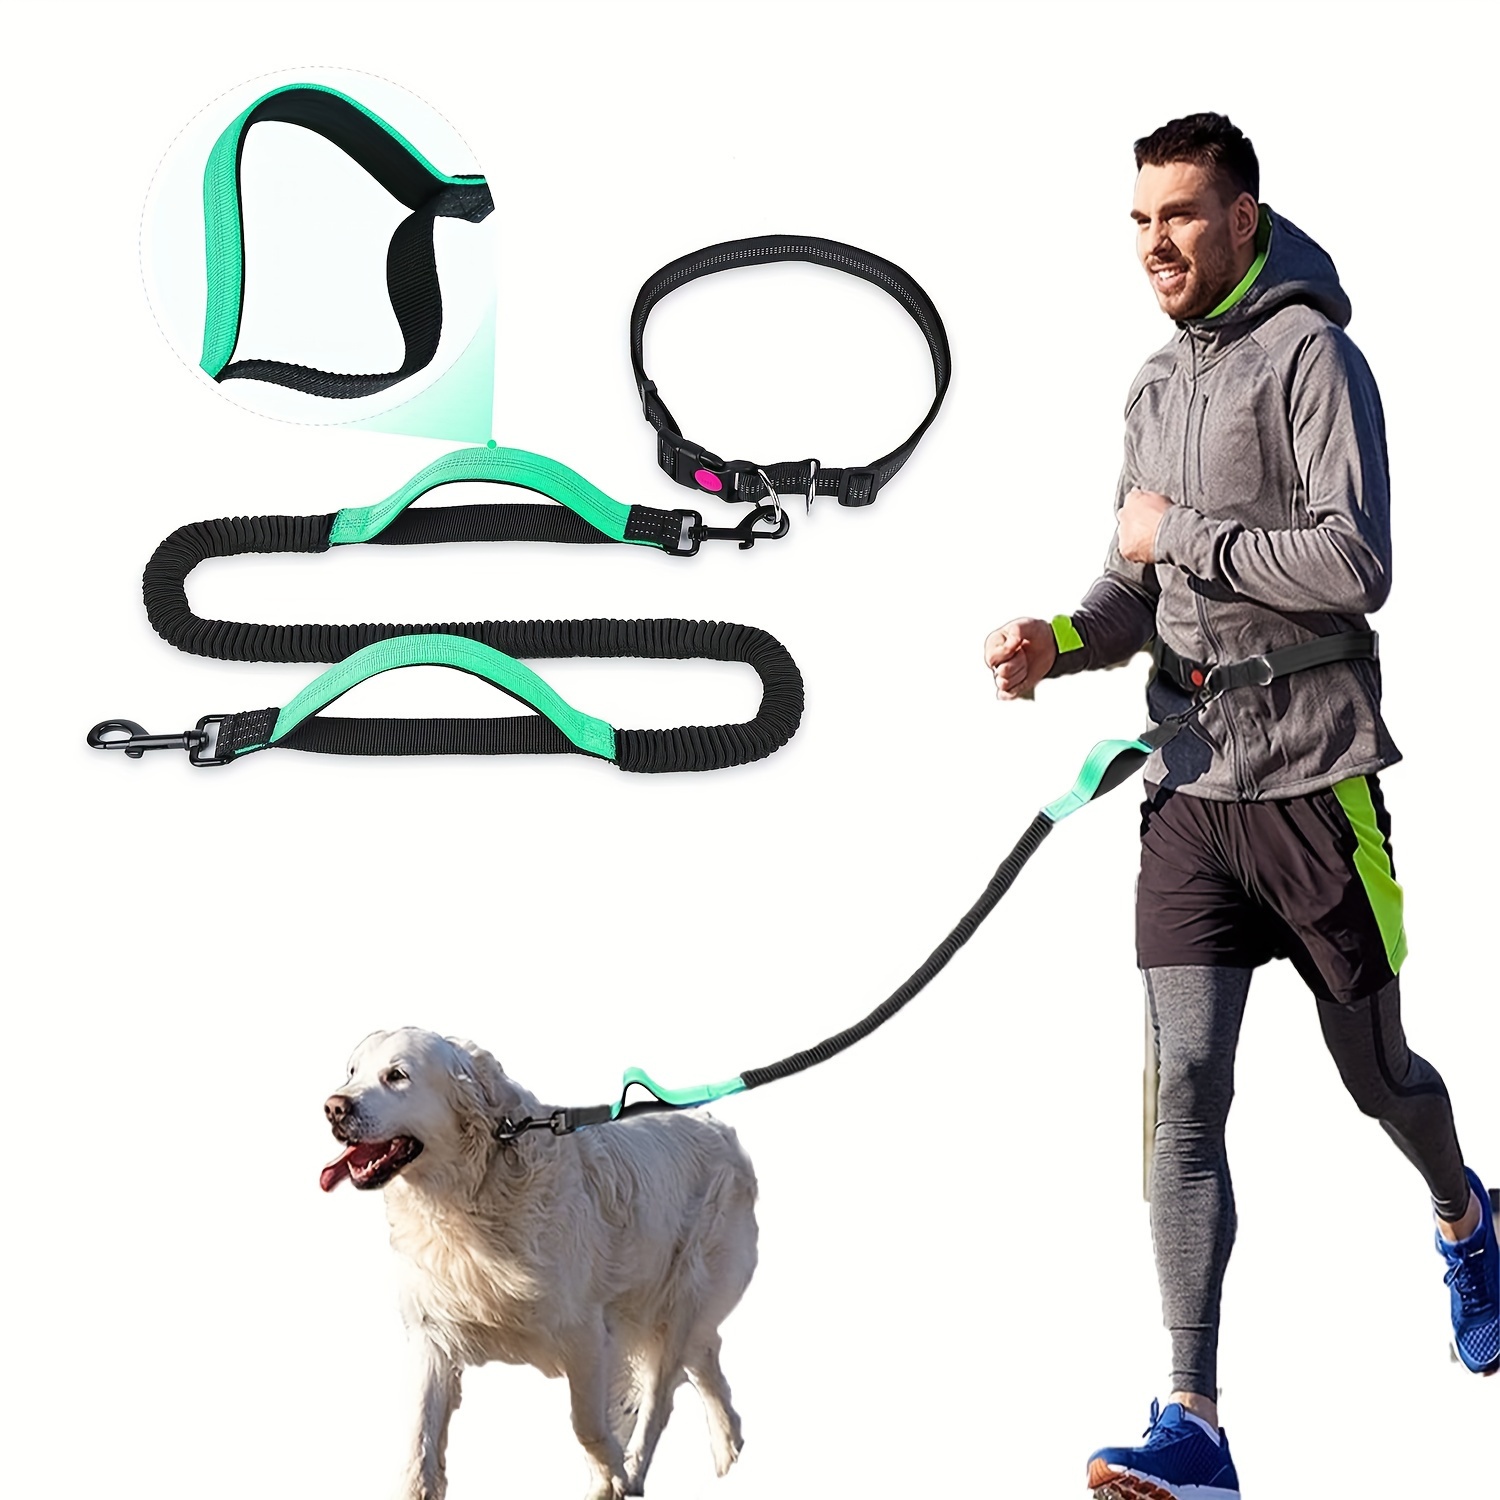 

Hands Free Dog Leash For Running Walking Training Hiking, Adjustable Waist Belt, Shock Absorbing, Ideal For Medium To Large Dogs